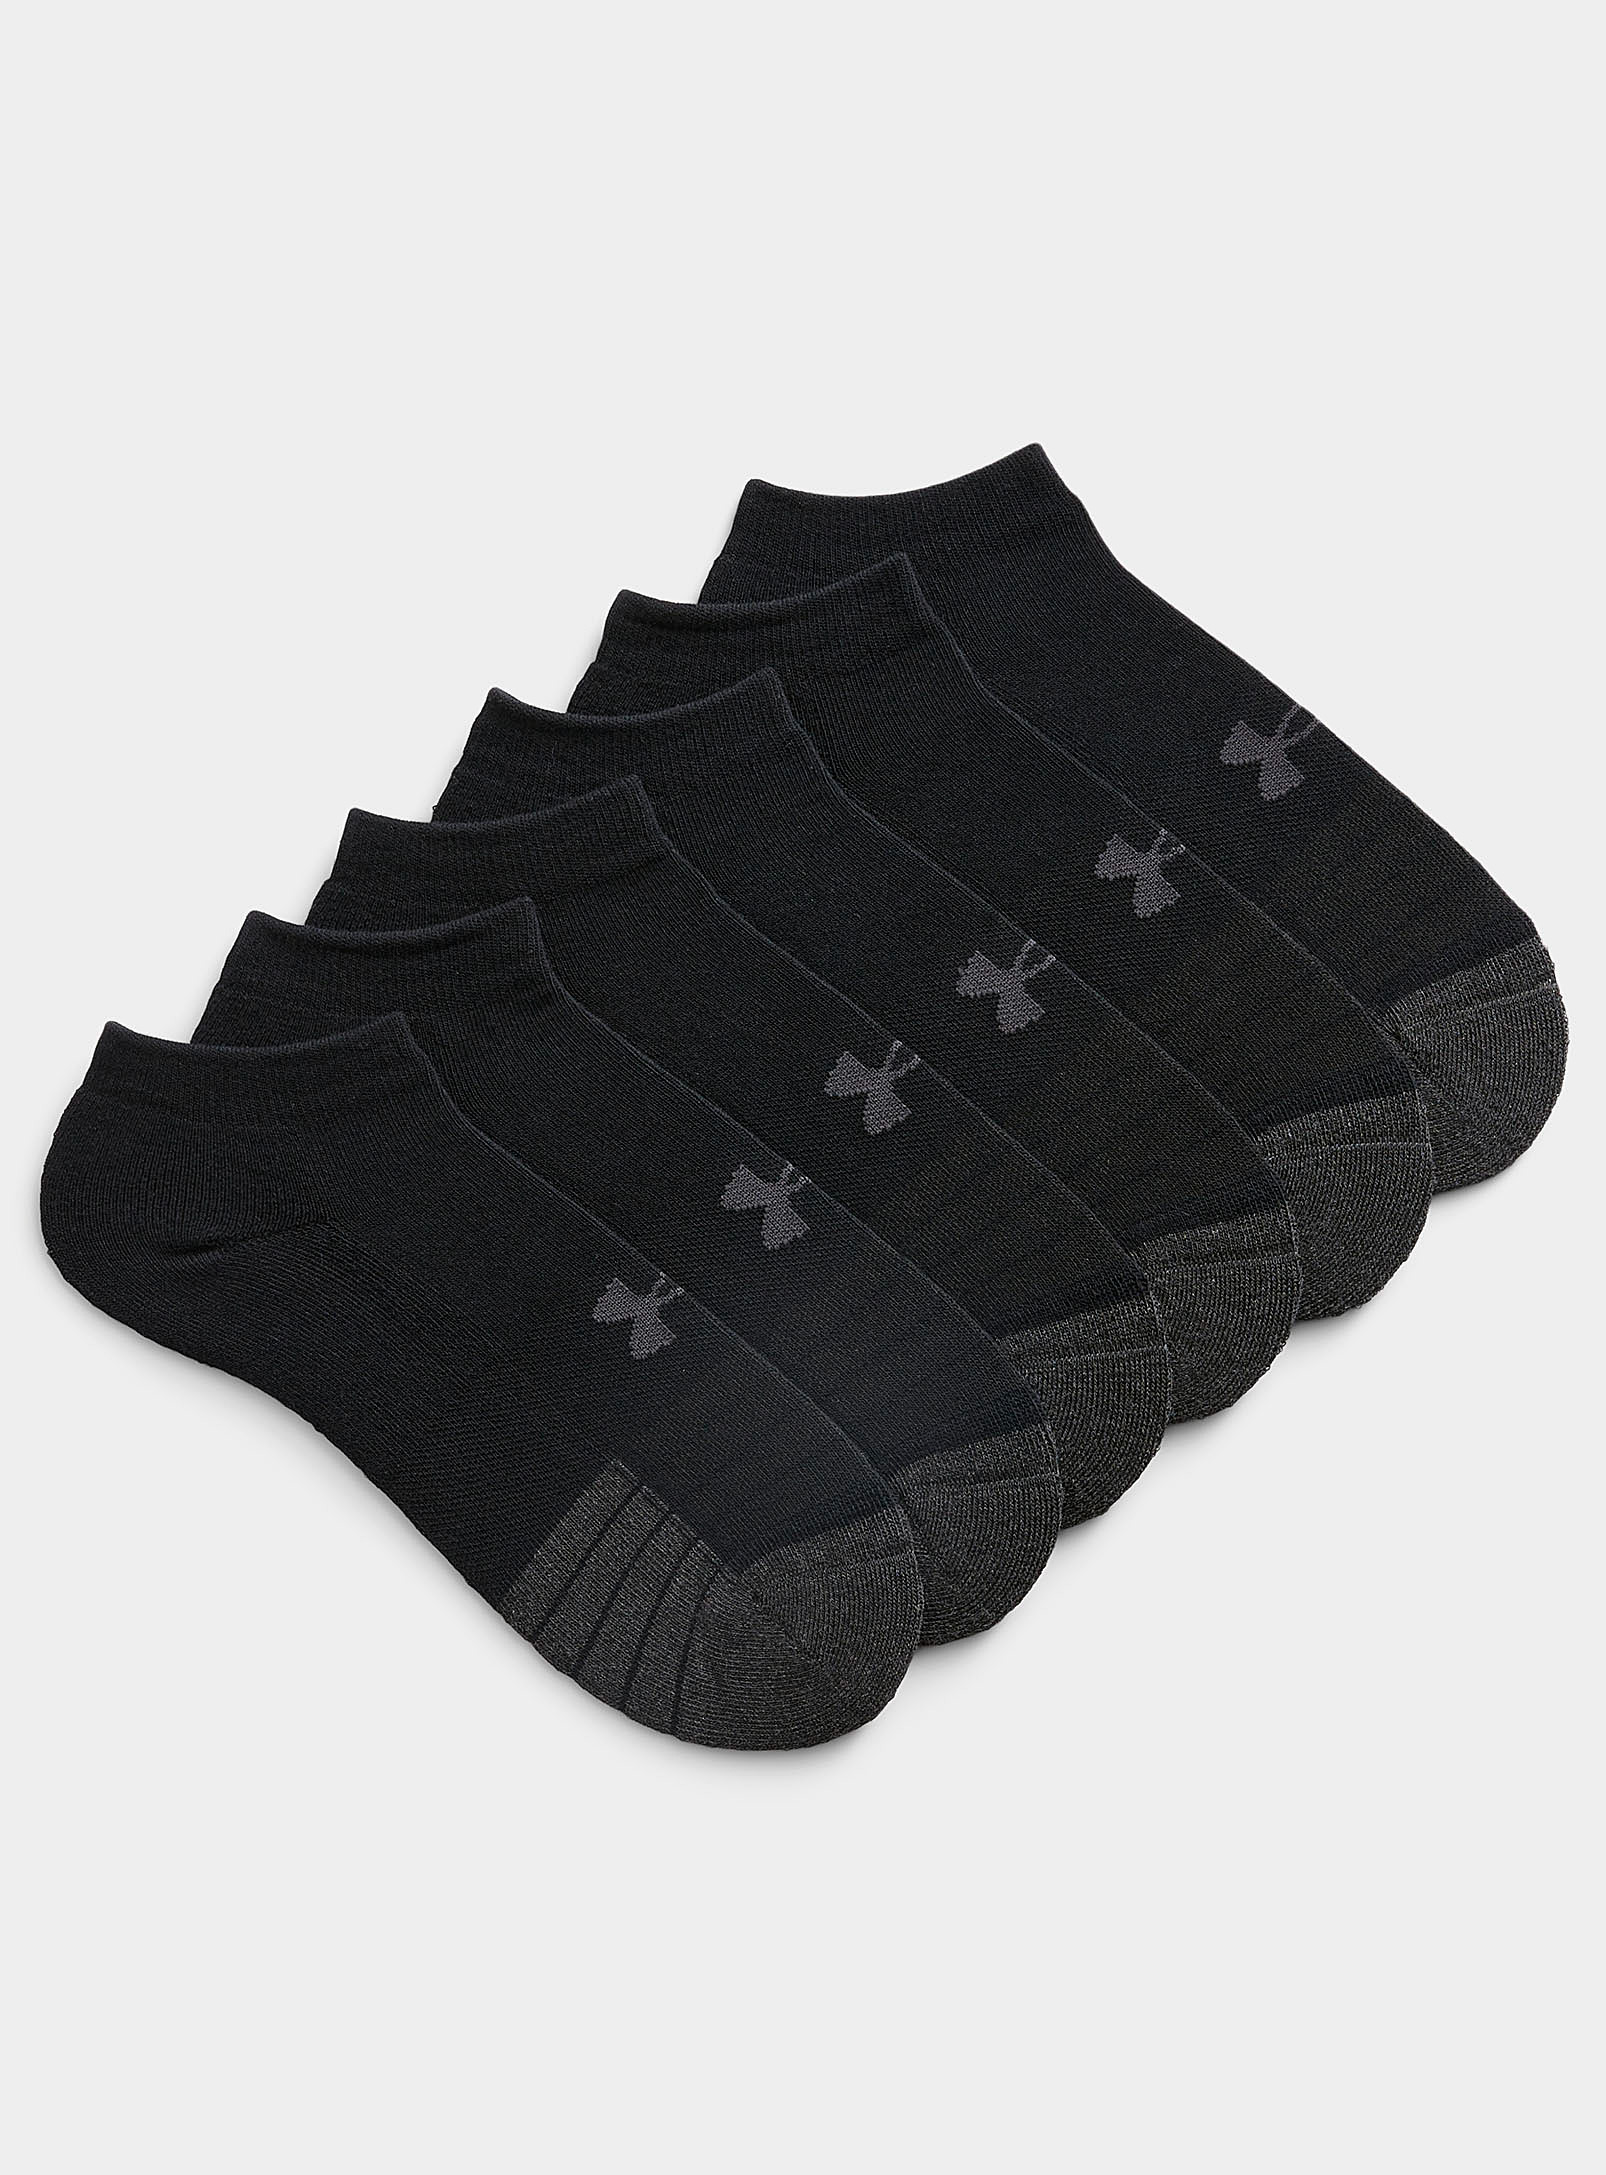 Under Armour Performance Tech Padded Ped Socks Set Of 6 In Brown